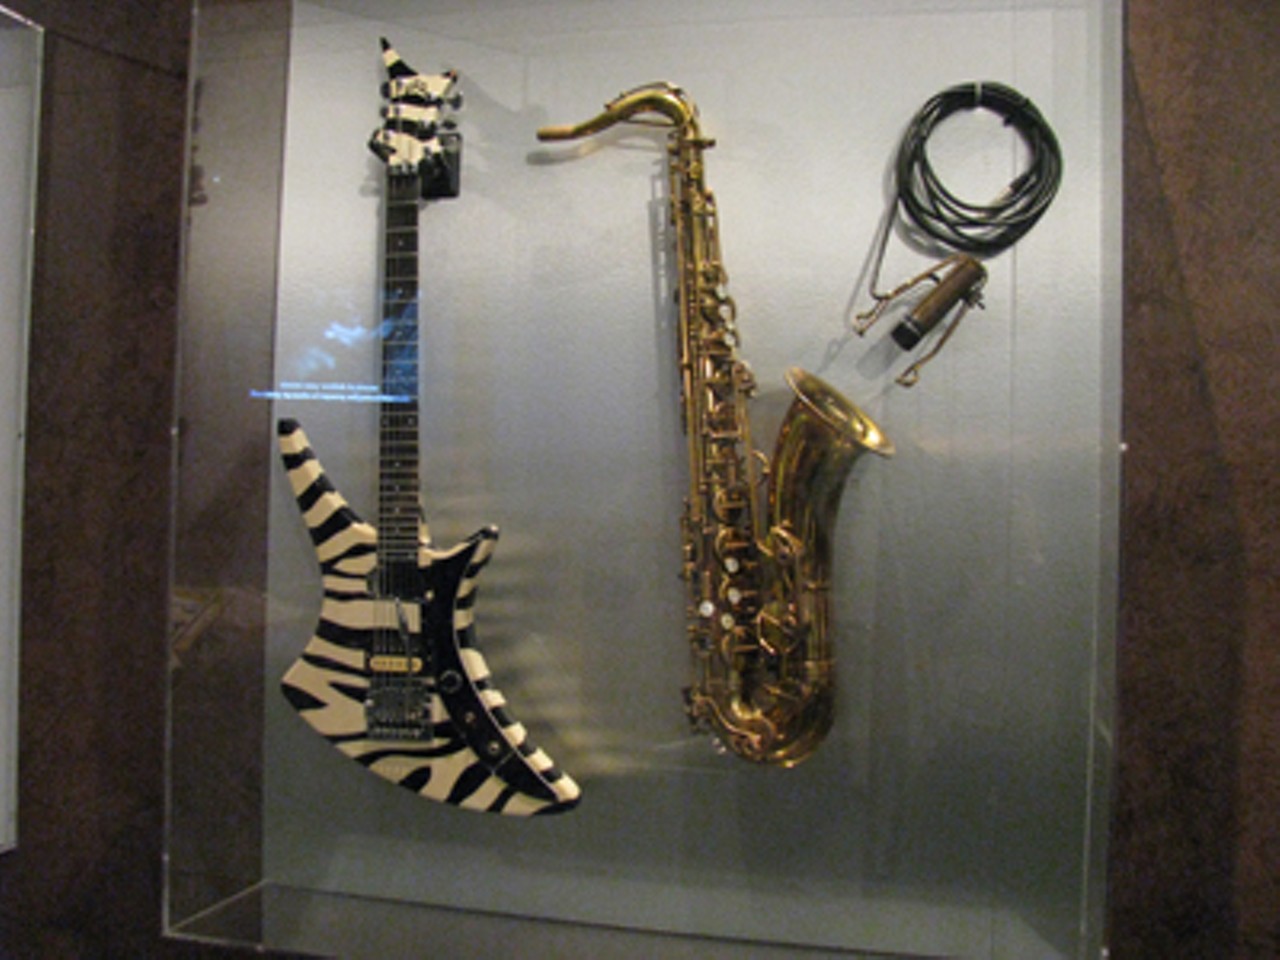 Two of Bruce Springsteen and the E Street Band's instruments: Clarence Clemons&rsquo; saxophone, of course, is on the right.